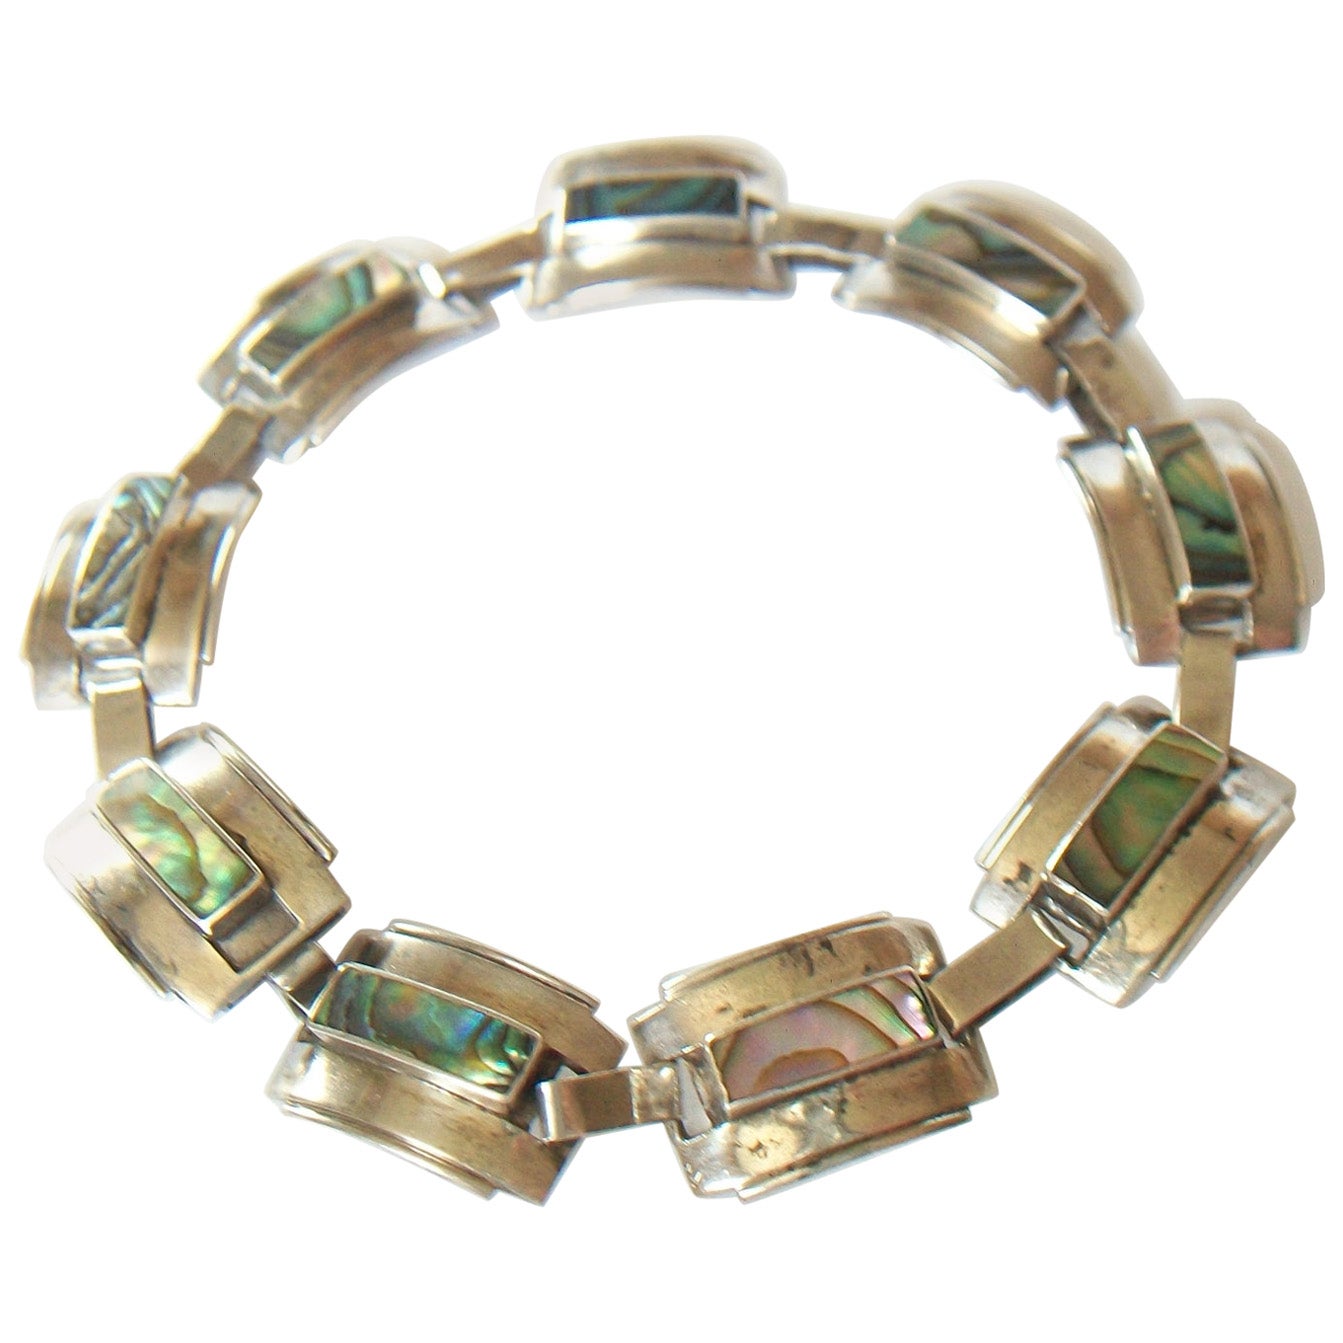 Modernist Sterling Silver & Abalone Link Bracelet - Mexico - Circa 1950's For Sale